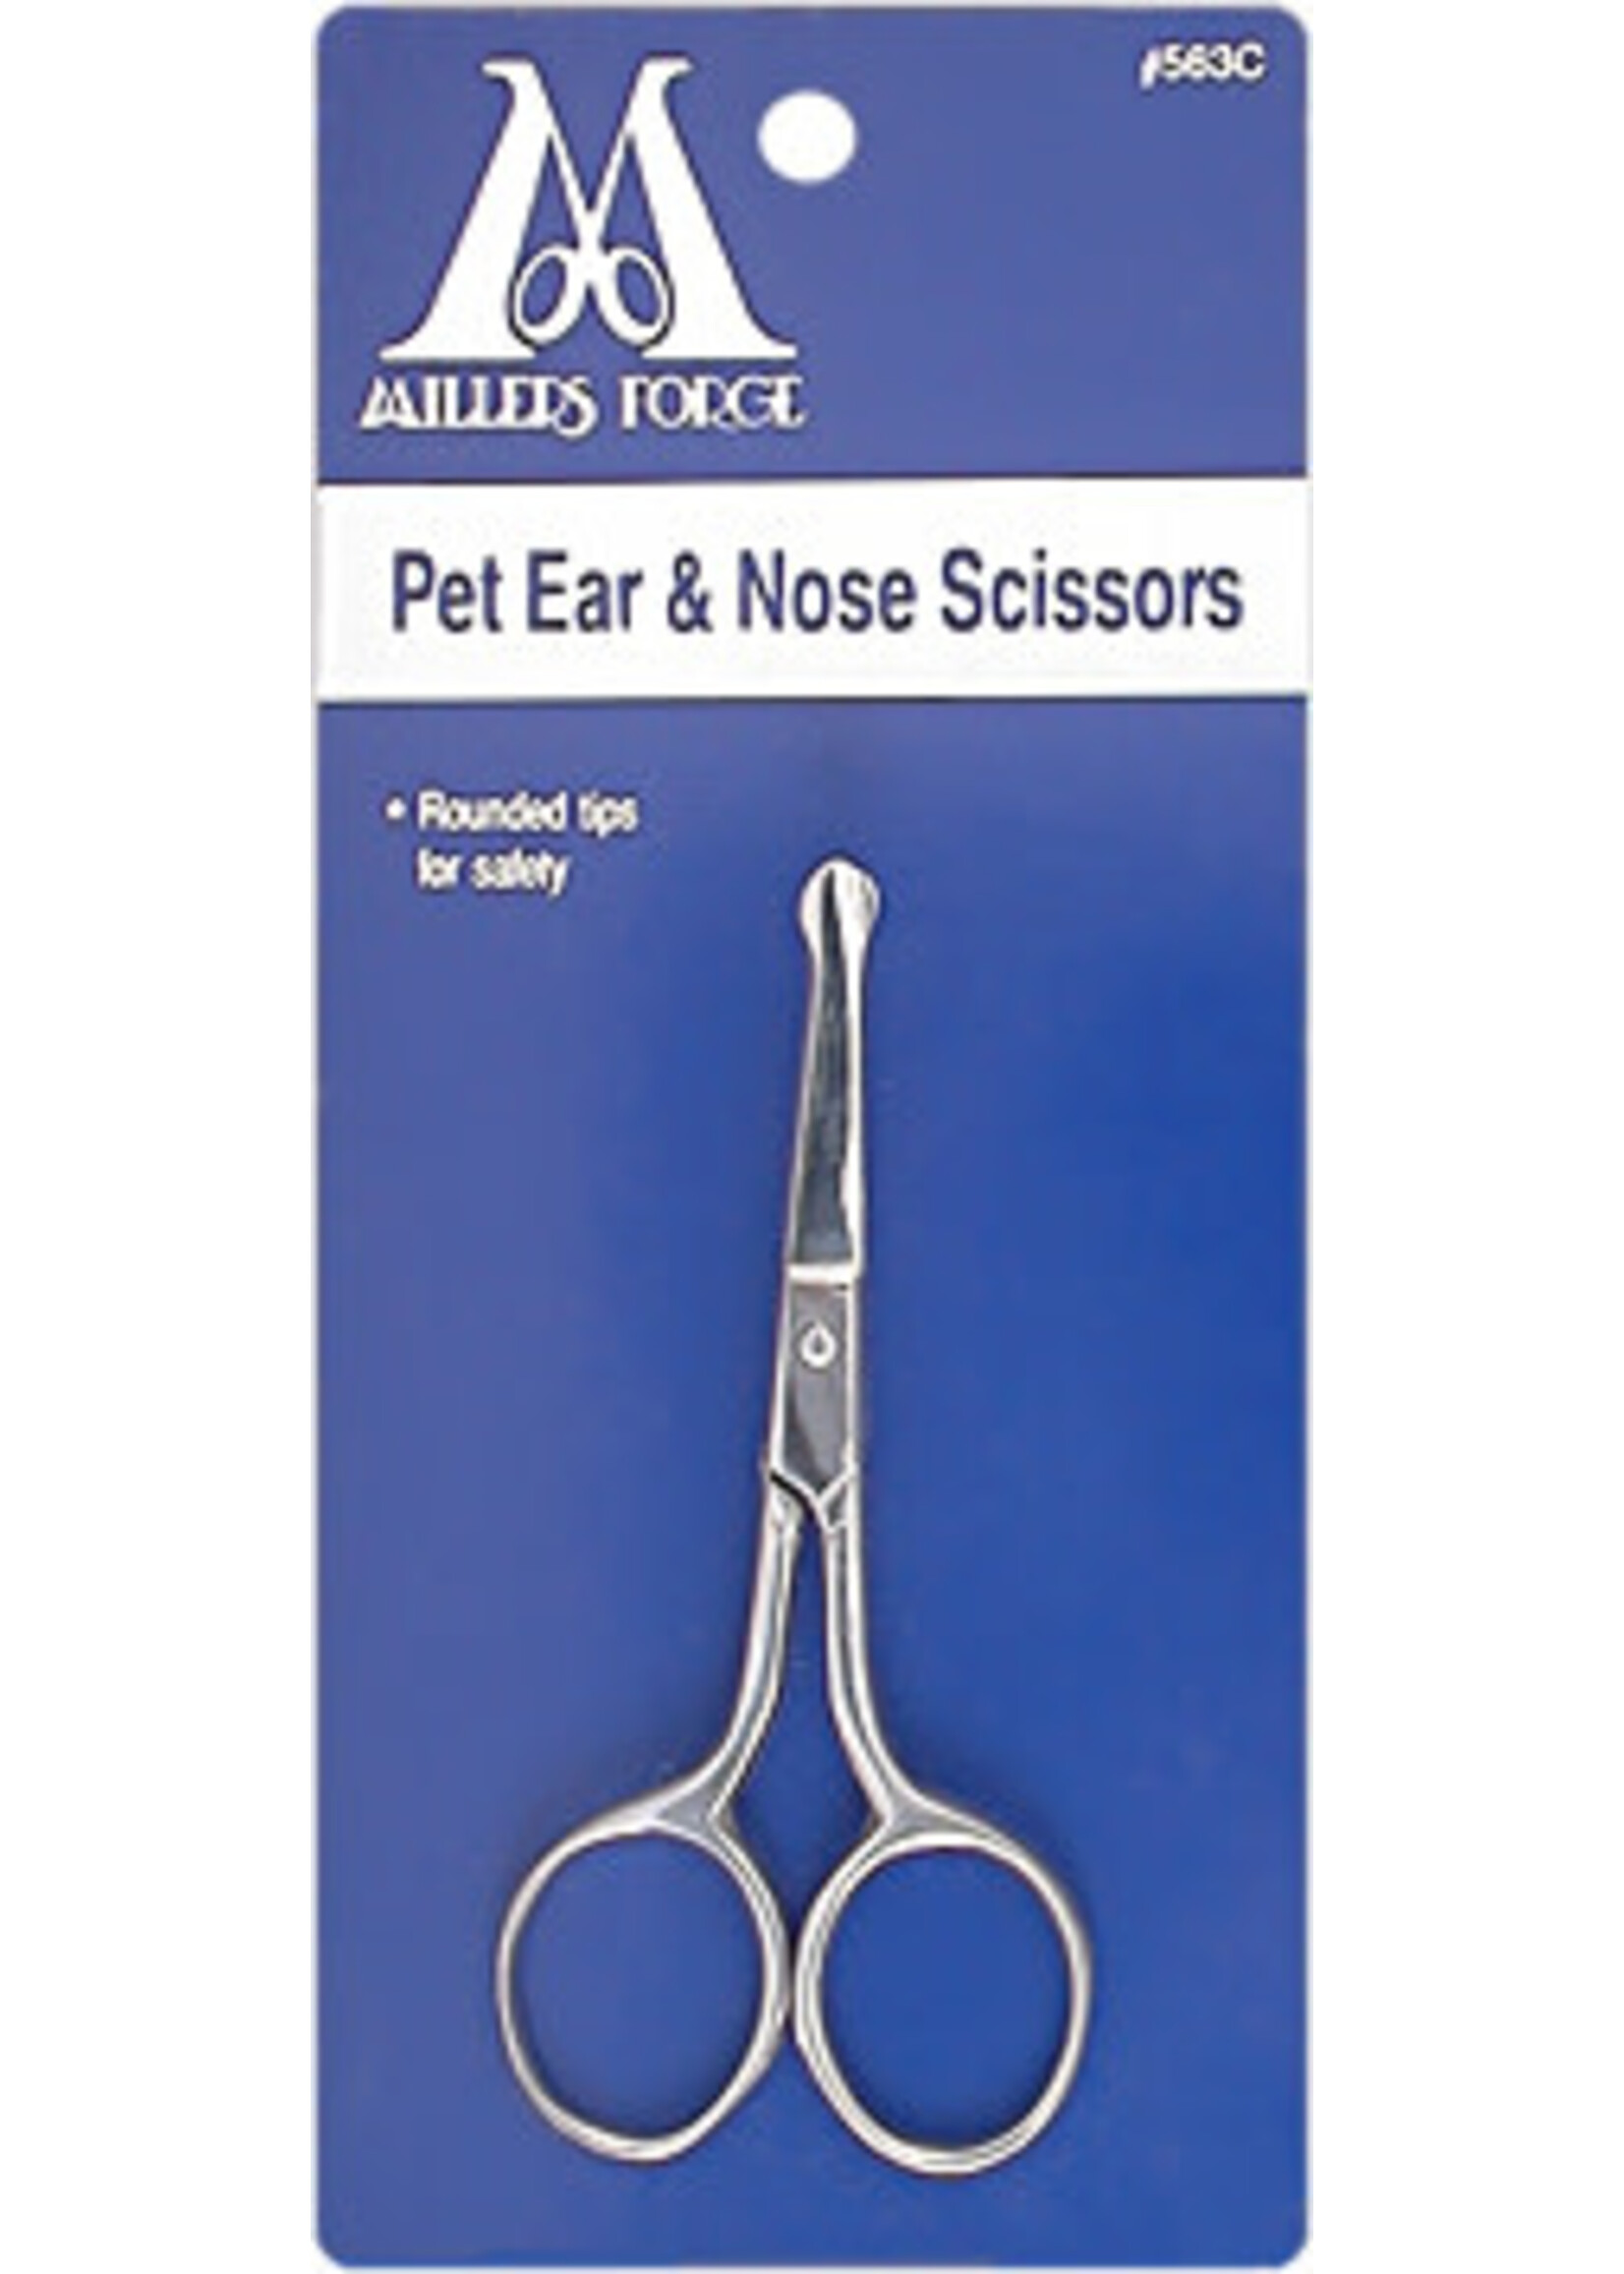 Millers Forge Millers Forge Pet Ear & Nose Scissors